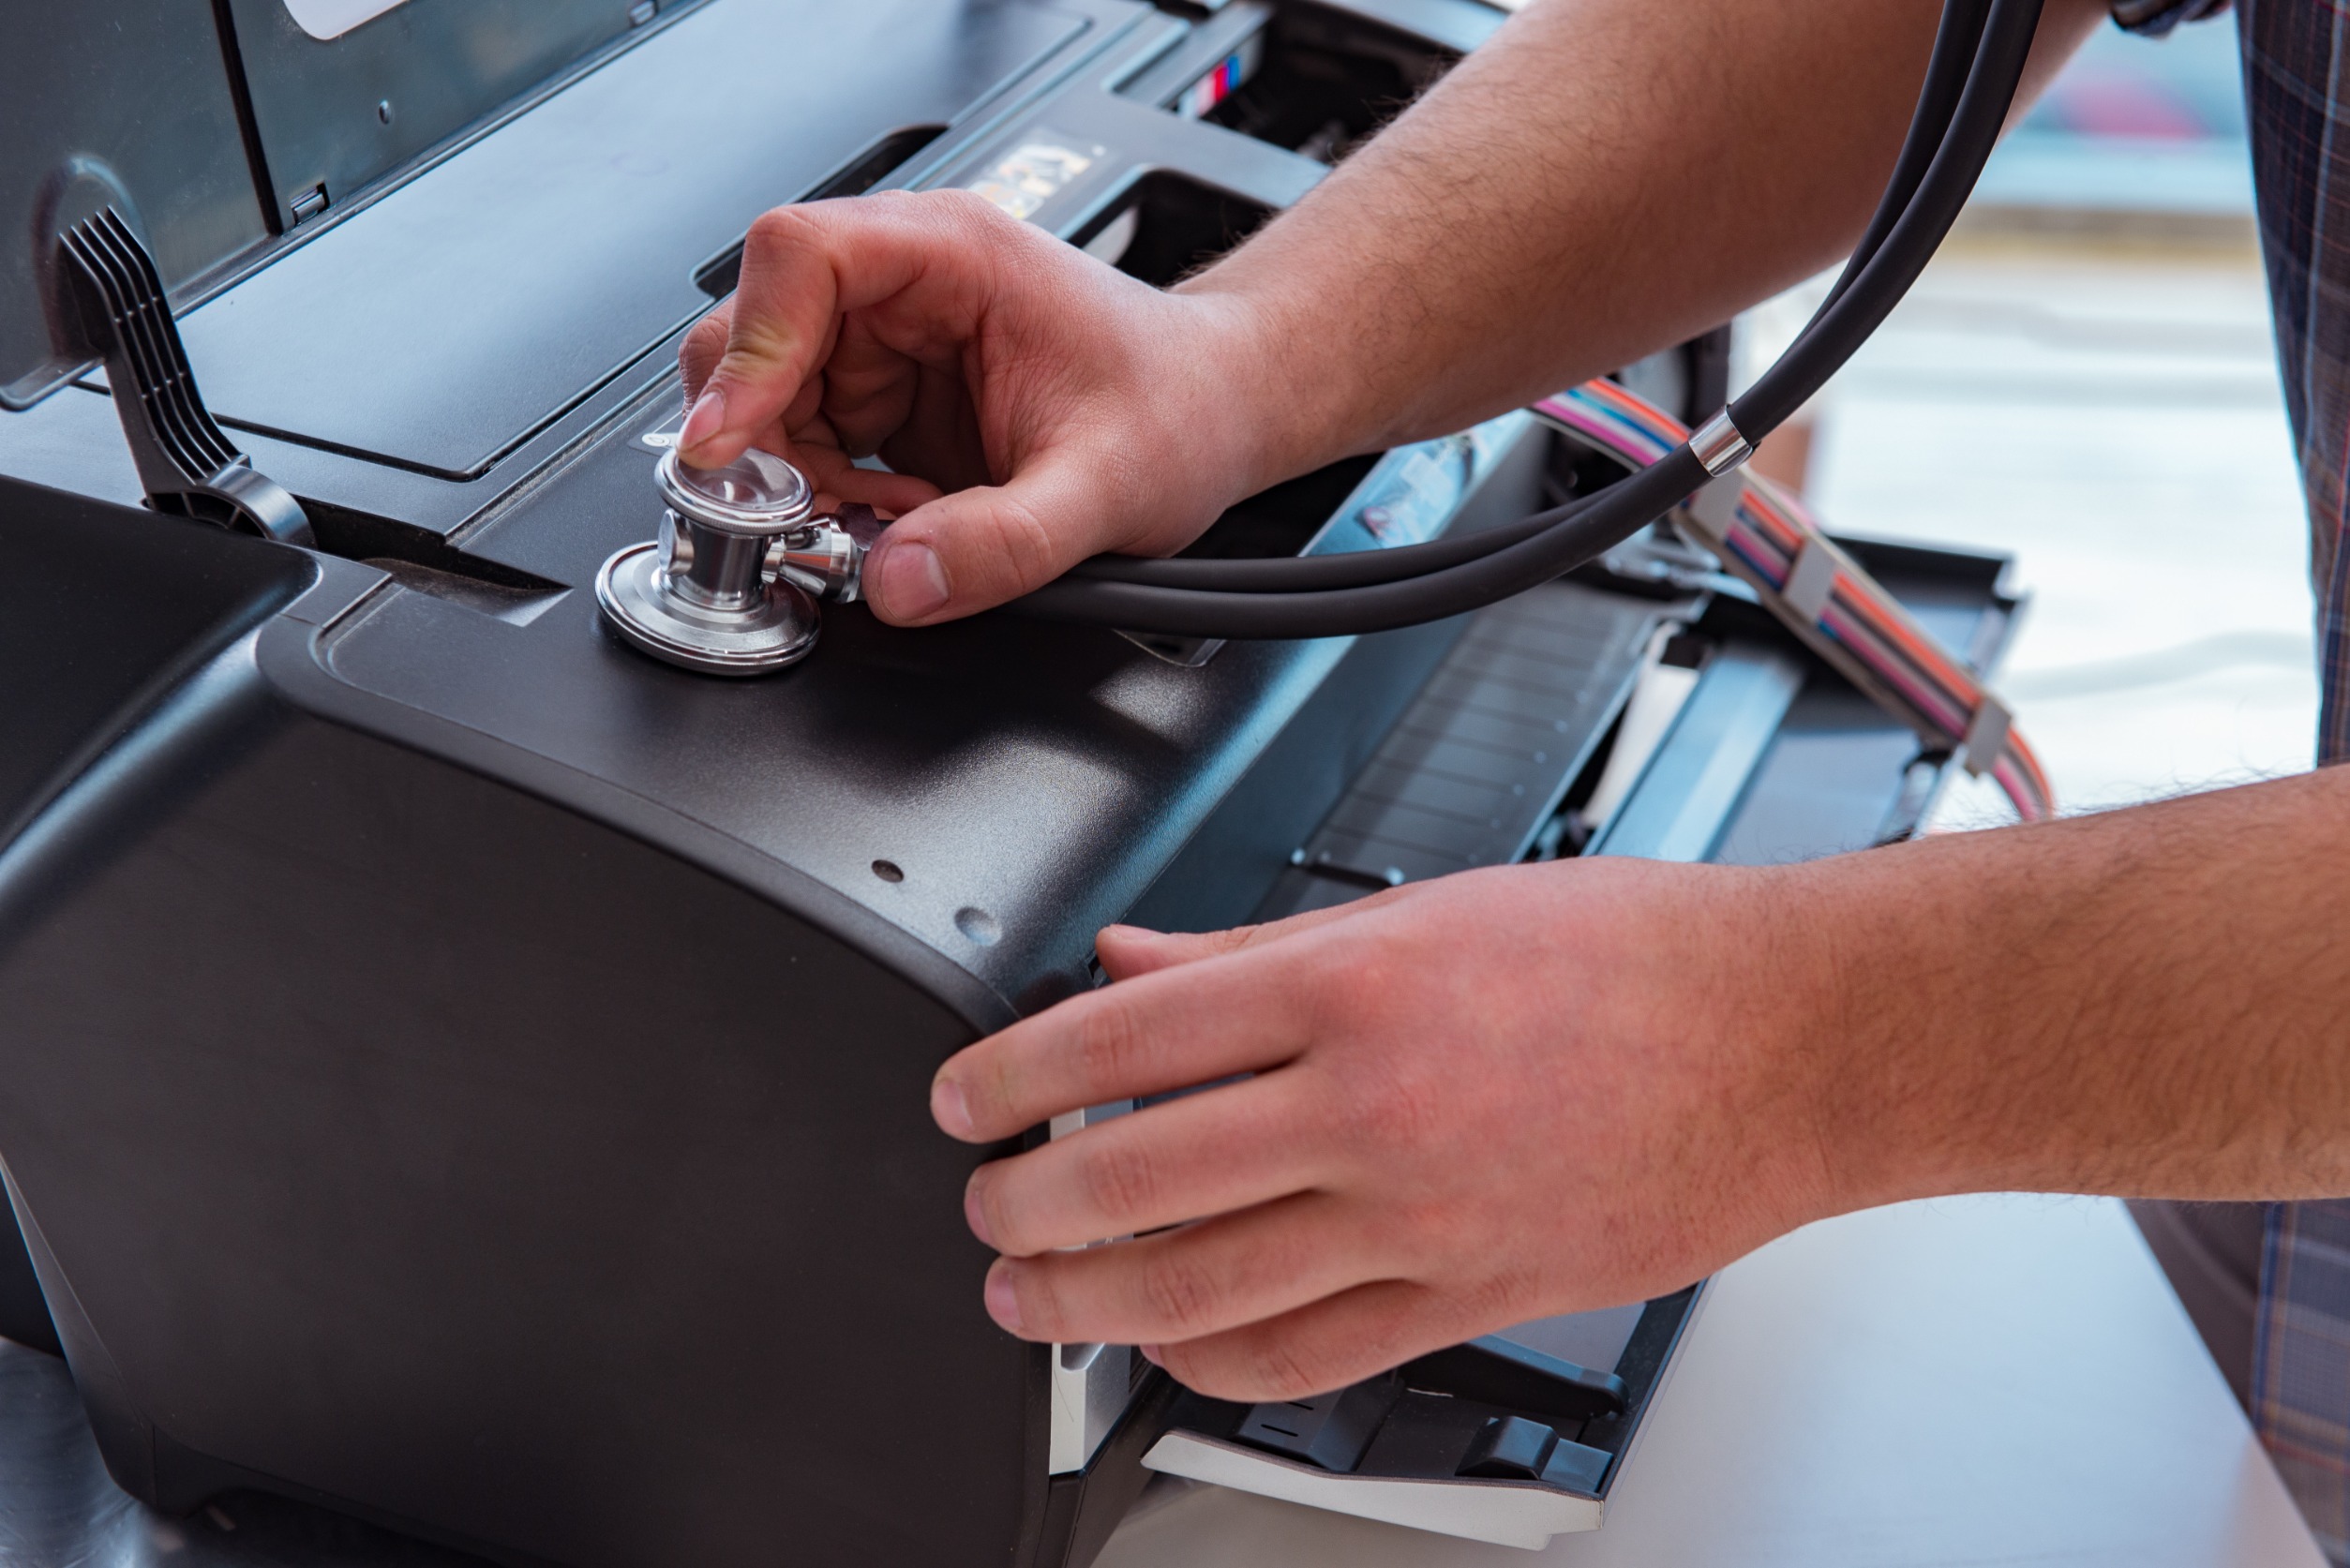 Troubleshooting Common Printer Issues